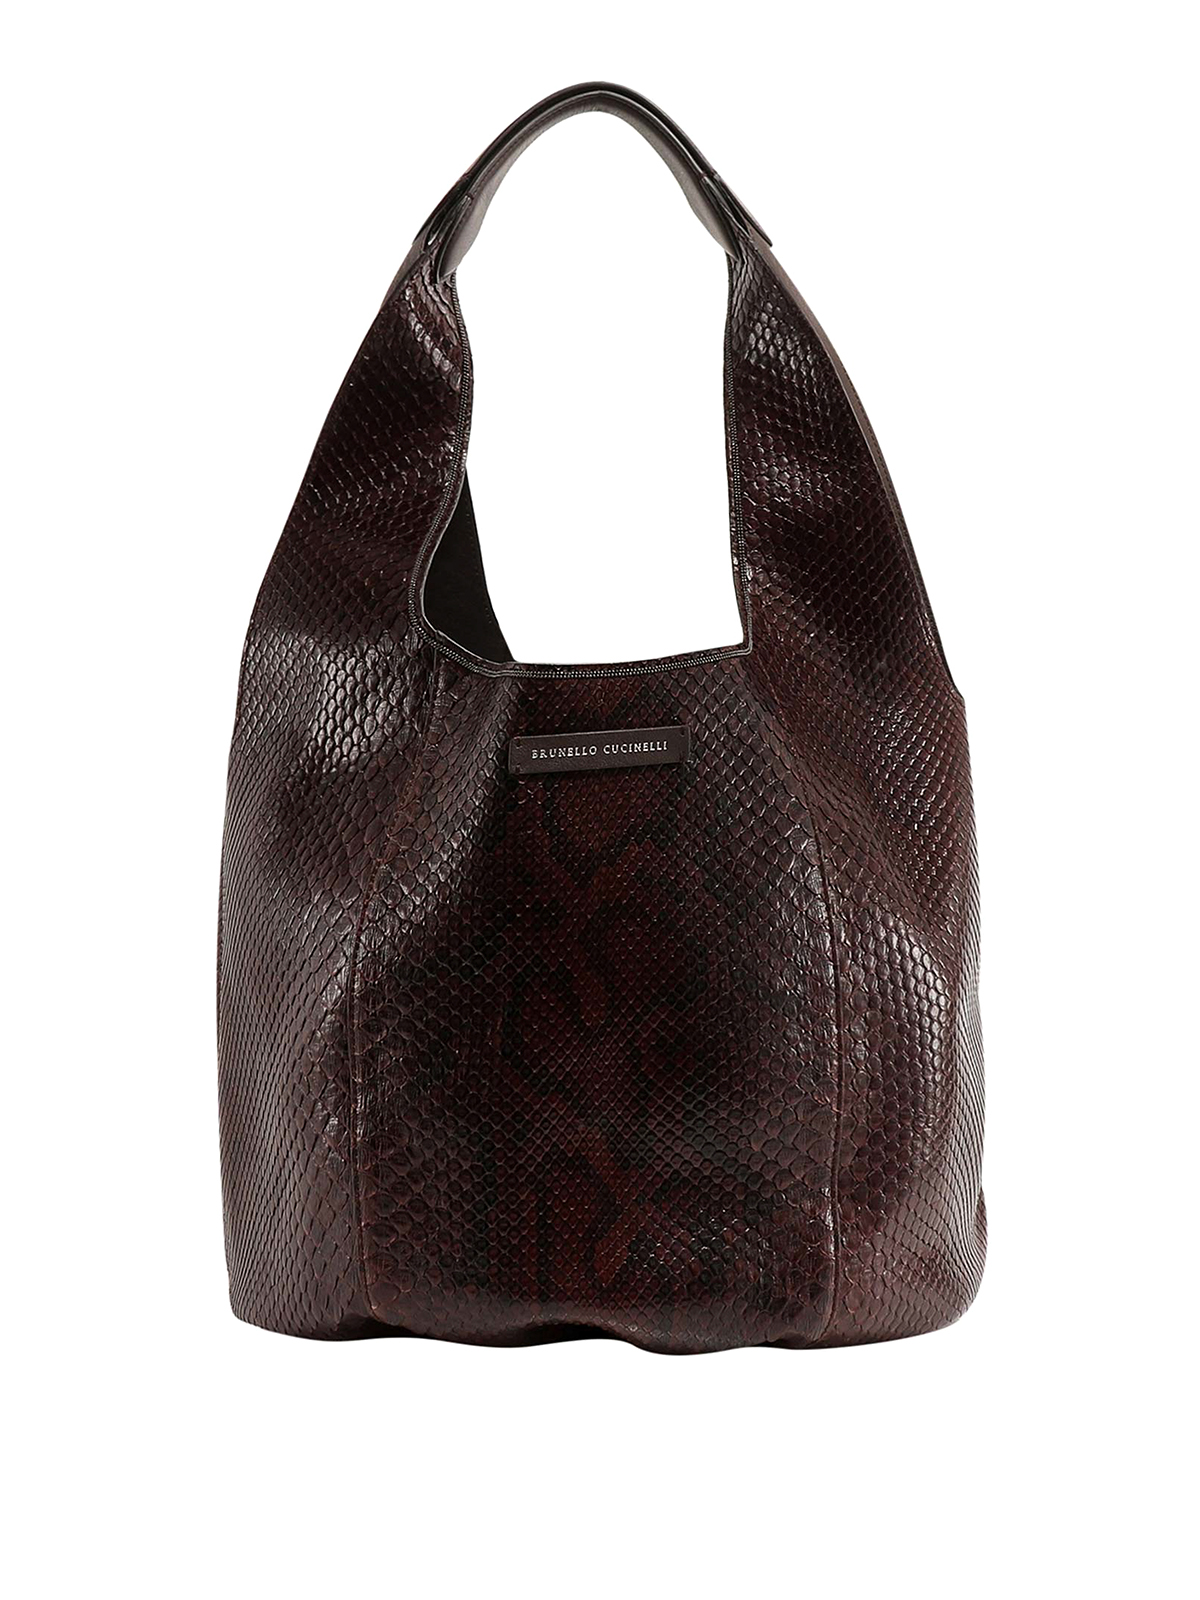 Brunello Cucinelli - Python print leather hobo bag - totes bags ...